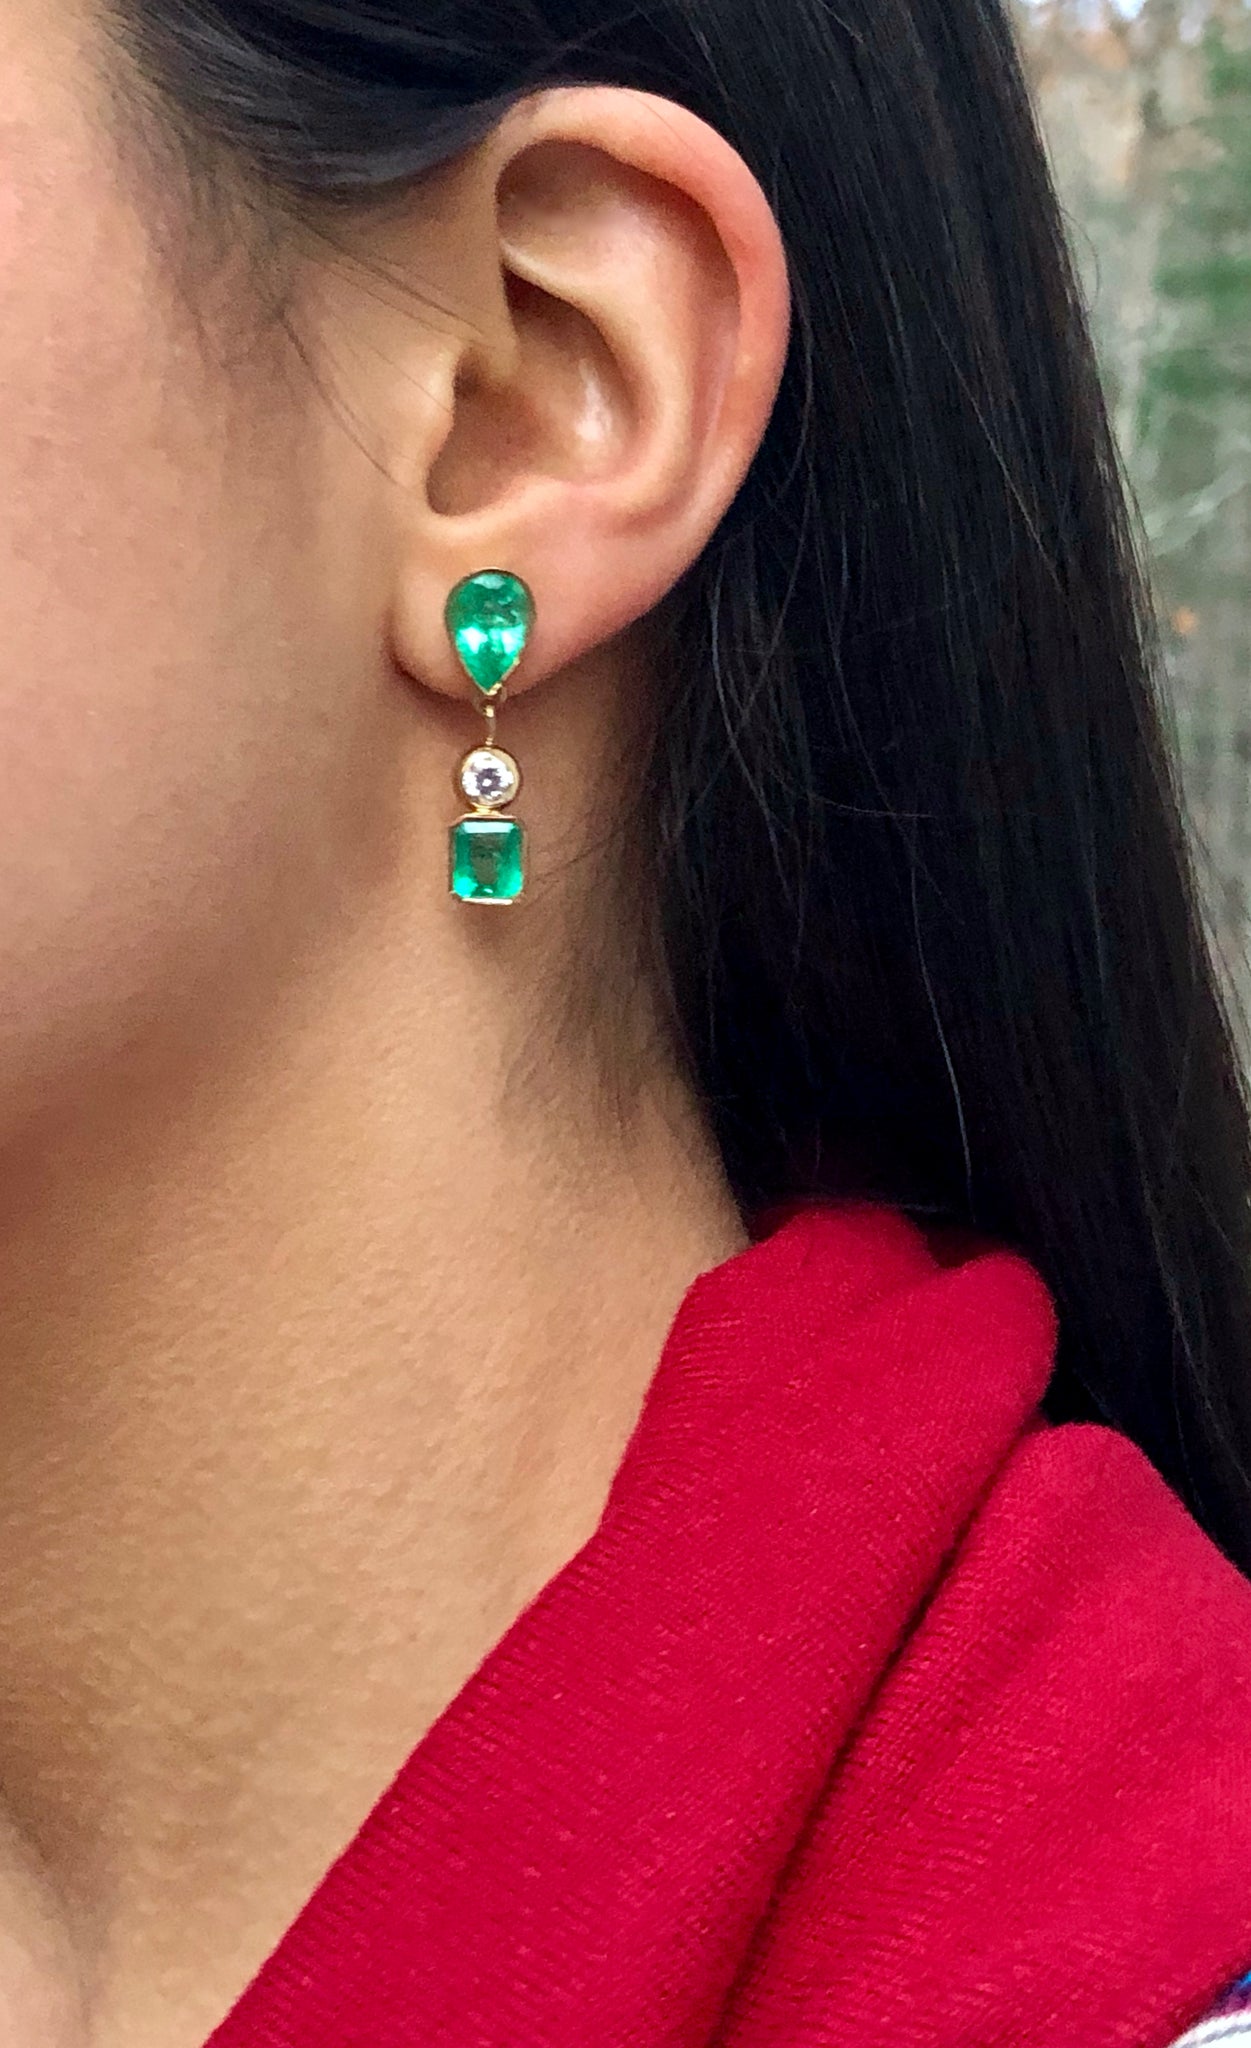 Magnificent 10.12 Carats Natural Colombian Emerald & Diamond Dangle Earrings 18K